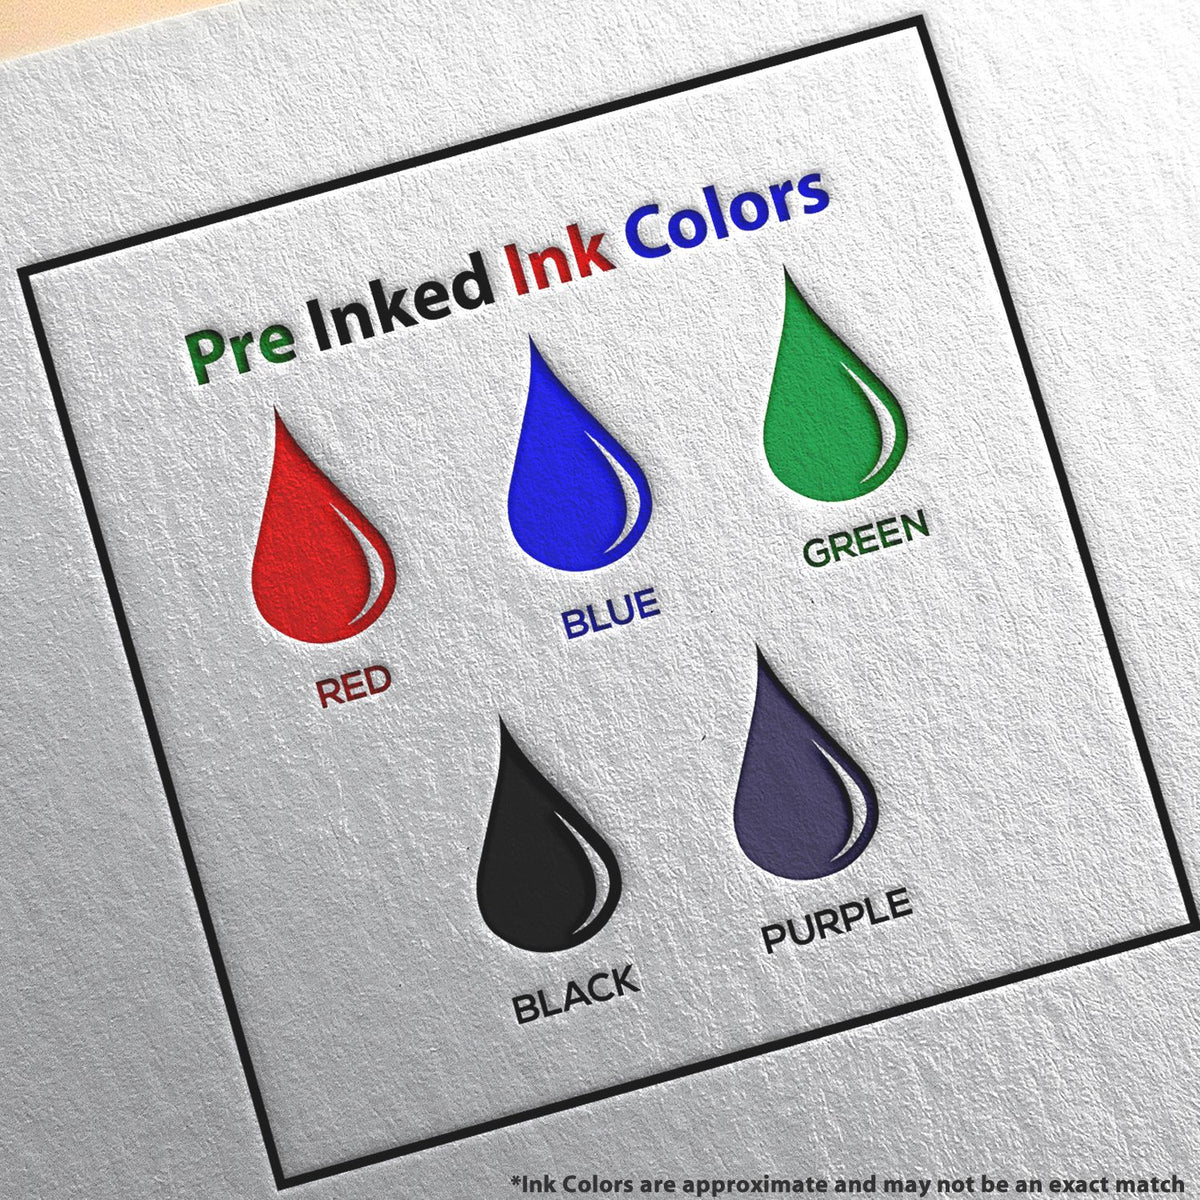 A picture showing the different ink colors or hues available for the Super Slim Alaska Notary Public Stamp product.